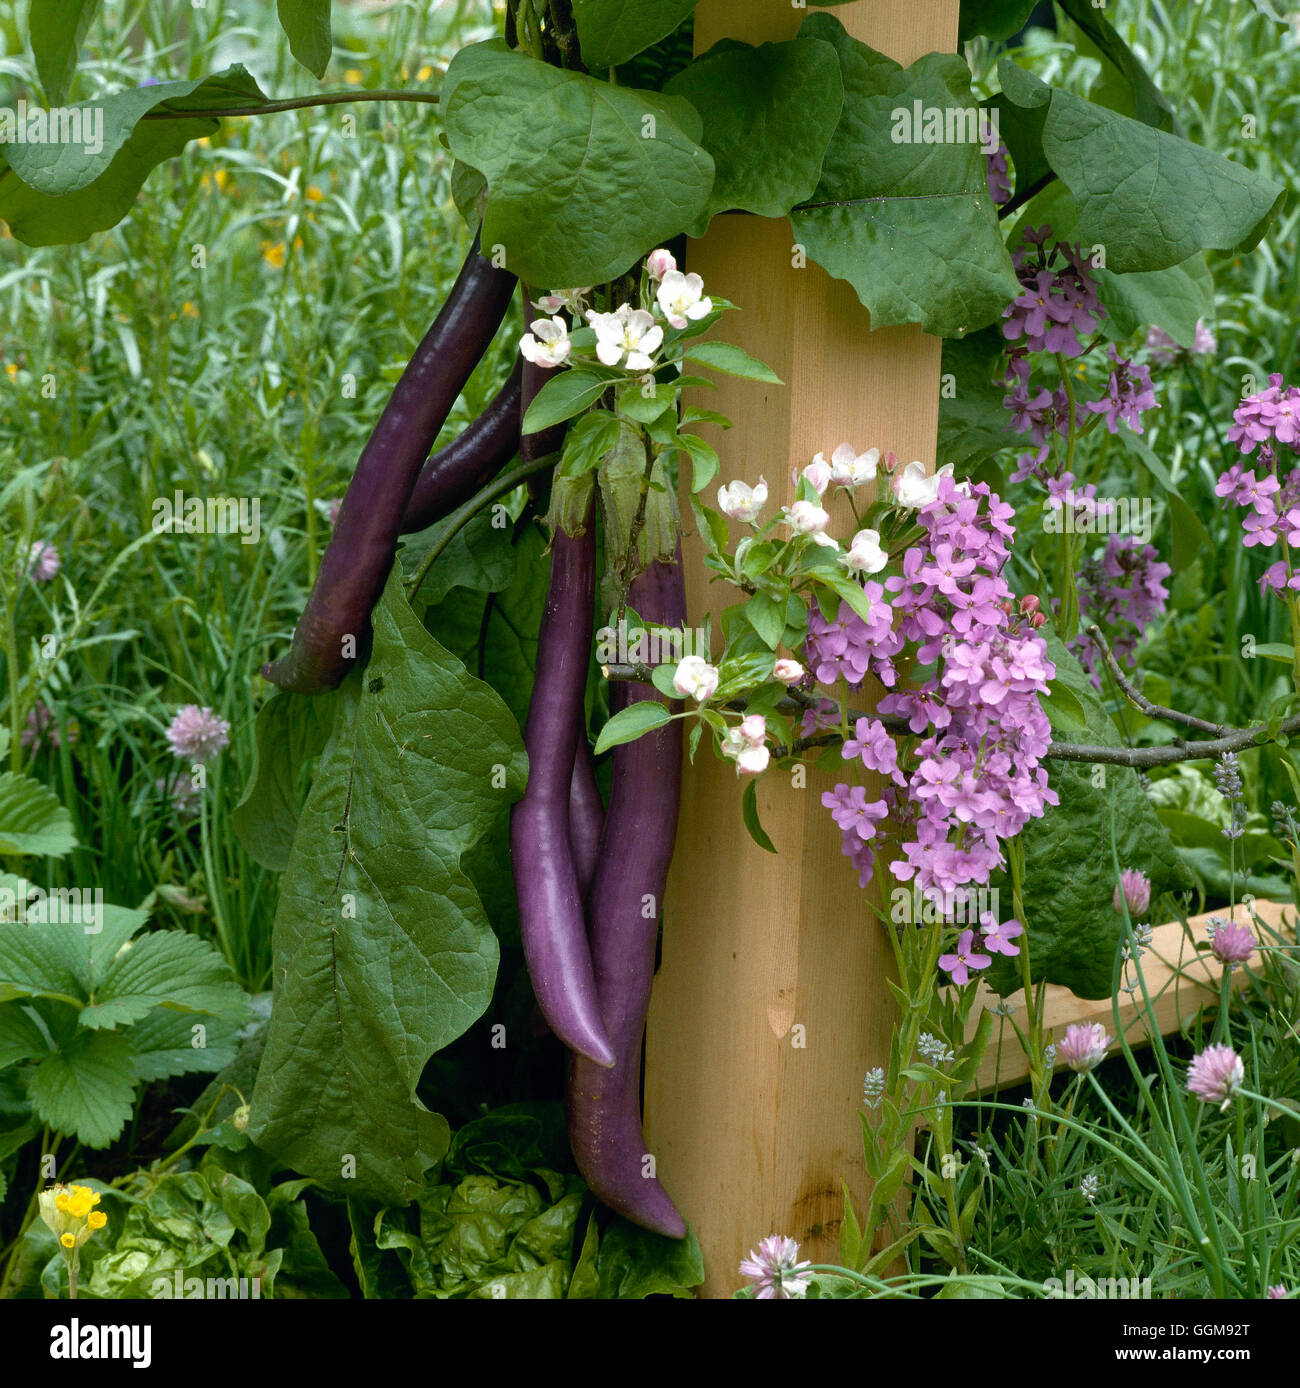 Aubergine - `Violetti di Firenze' - (On 'The Edible Garden' exhibit at Chelsea FS 1994  by Julie Toll)   VEG057149  Co Stock Photo